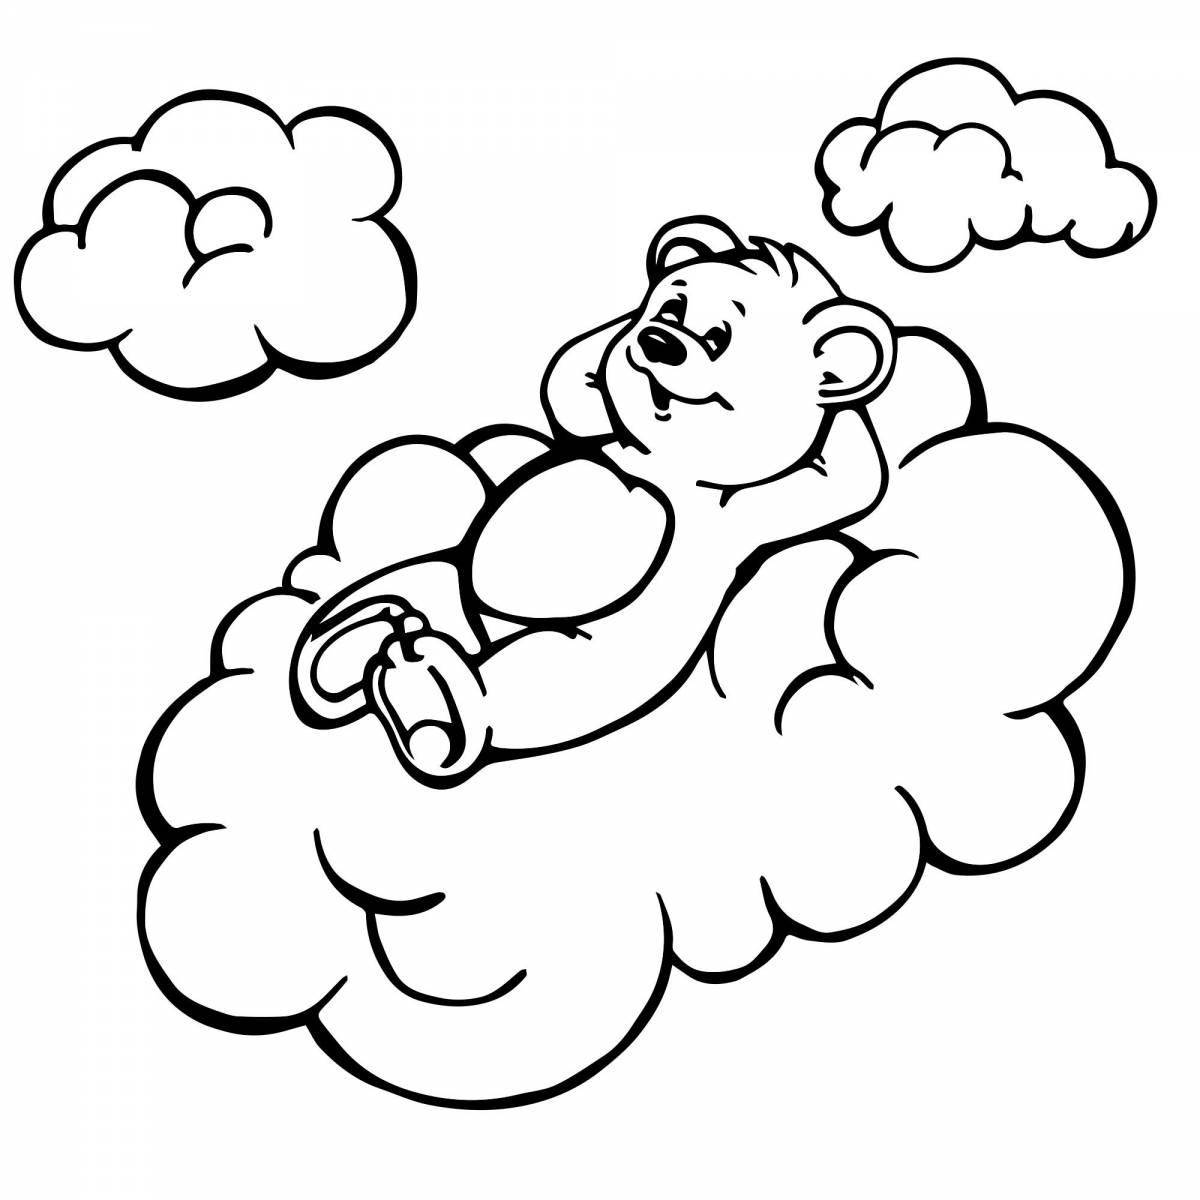 Amazing clouds coloring page